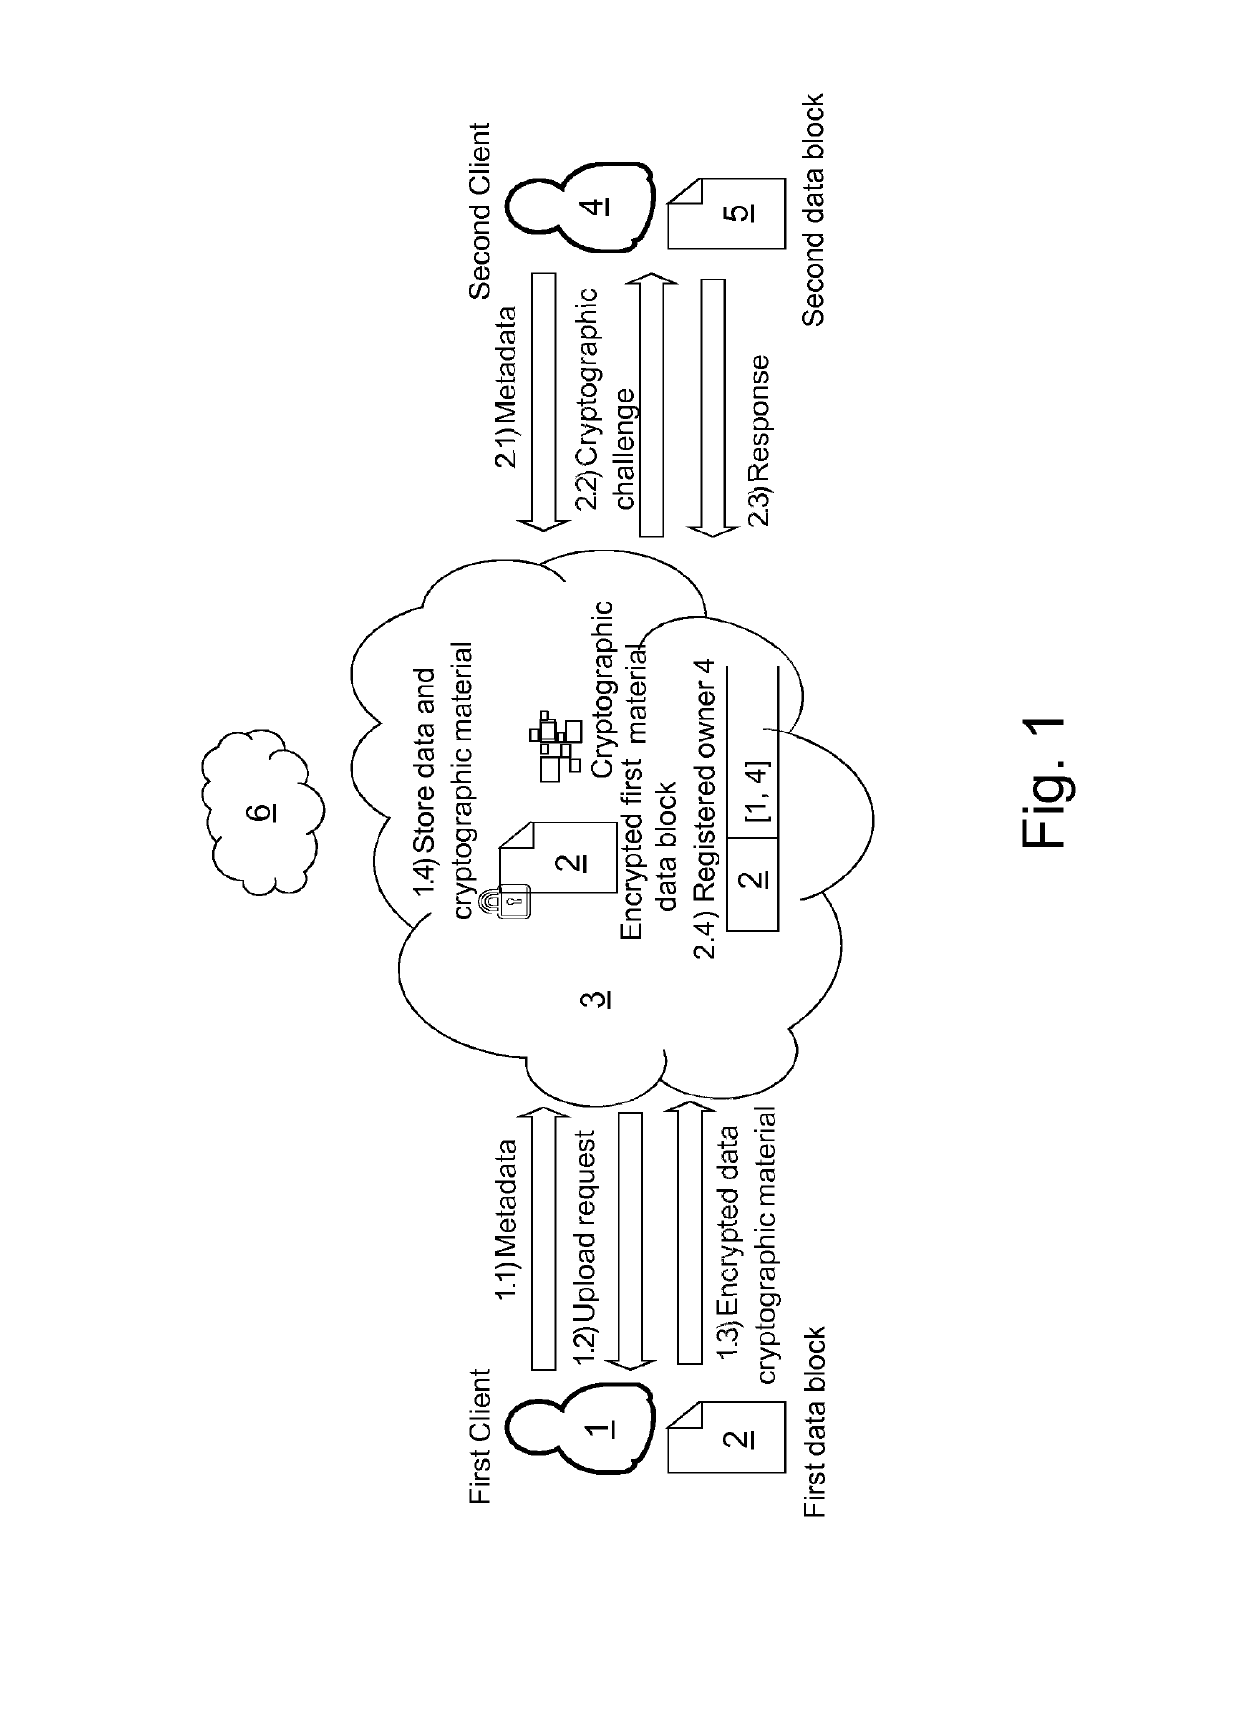 Method for storing data blocks from client devices to a cloud storage system